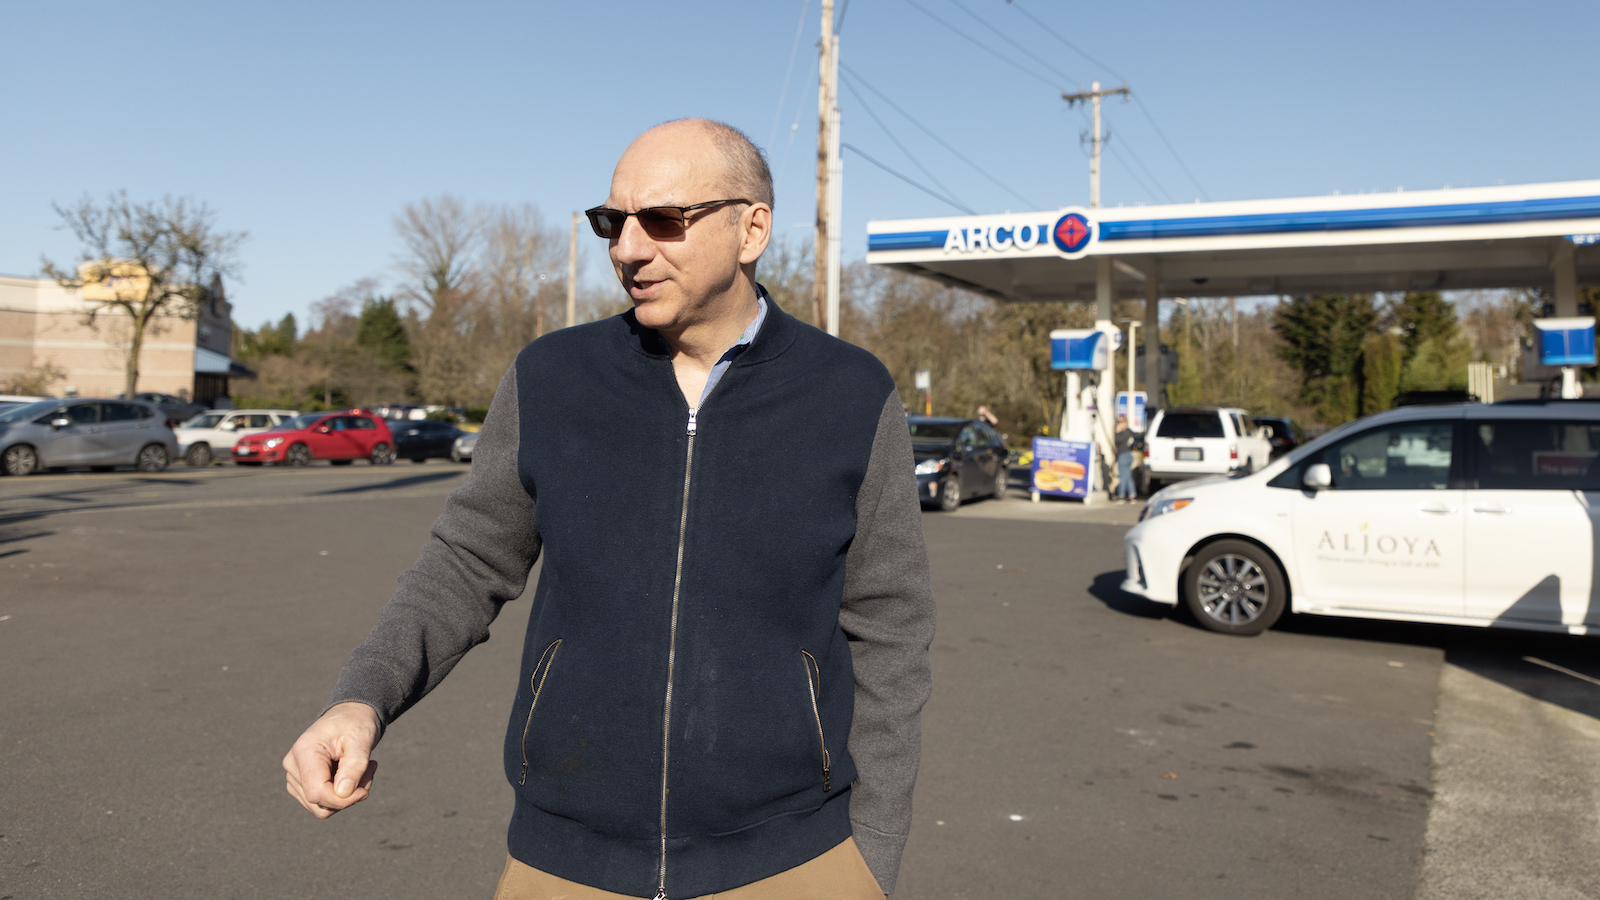 a man in a jacket and sunglasses walks in front of a gas station